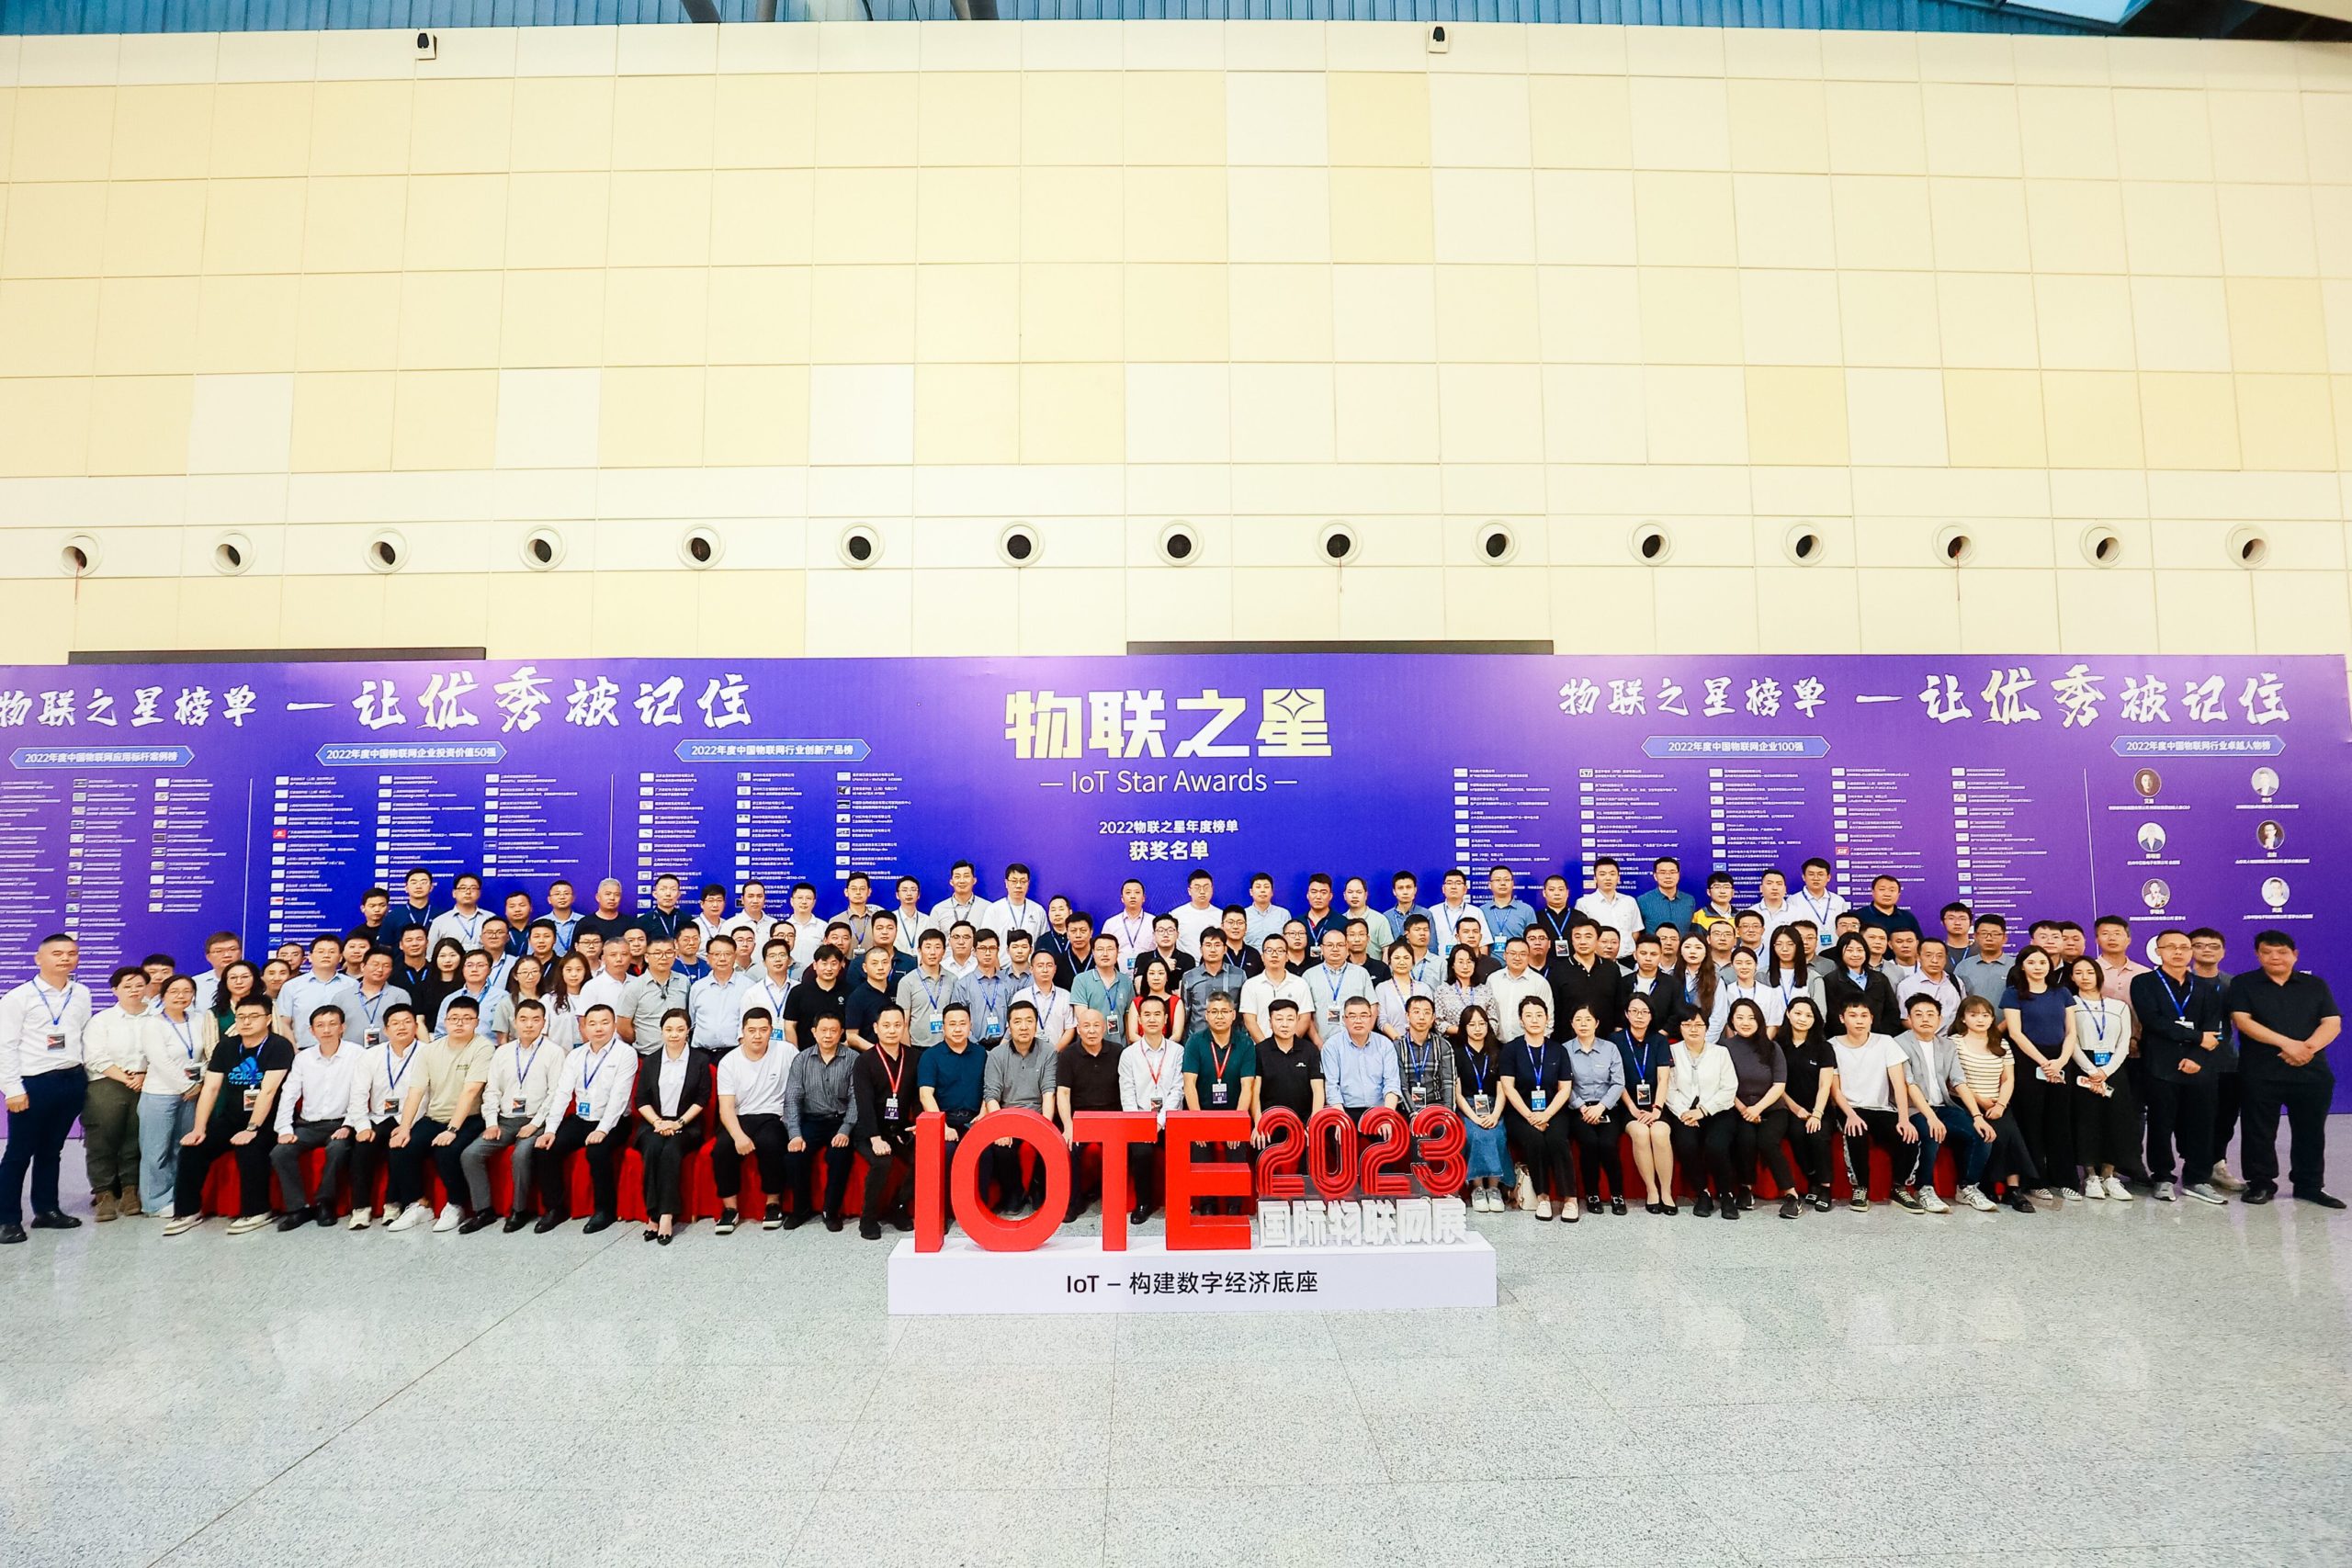 A group photo of MOKOSmart and other exhibitors in the IOTE 2023